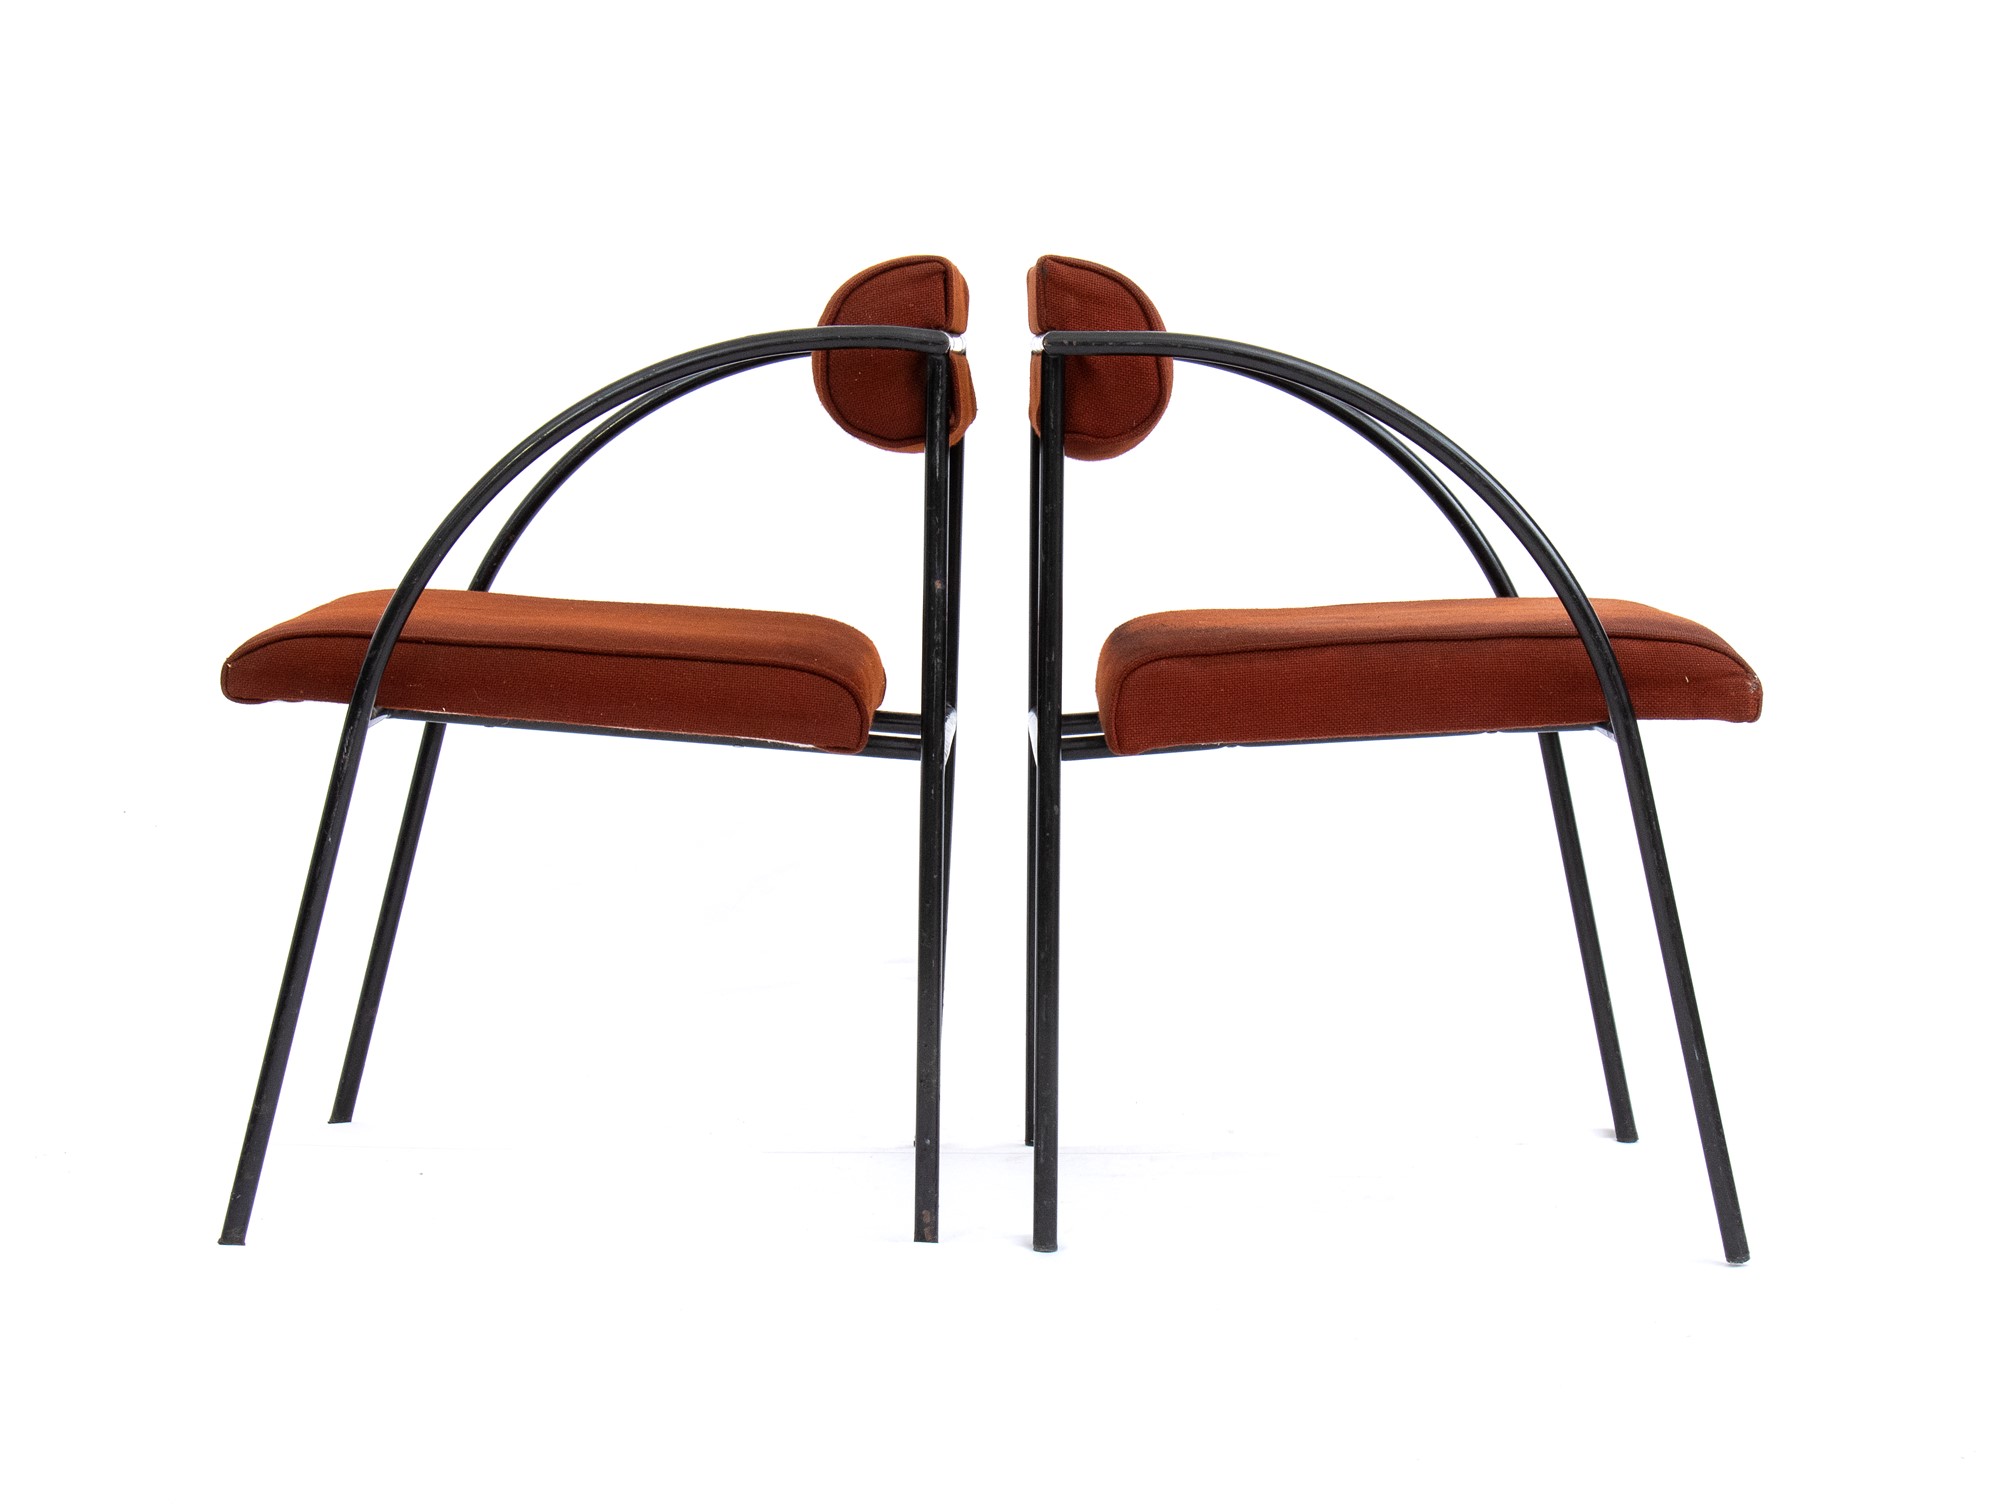 Rodney Kinsman Londra 1943 Set of two Wien chairs with round metal structure and curved armrests - Image 9 of 15